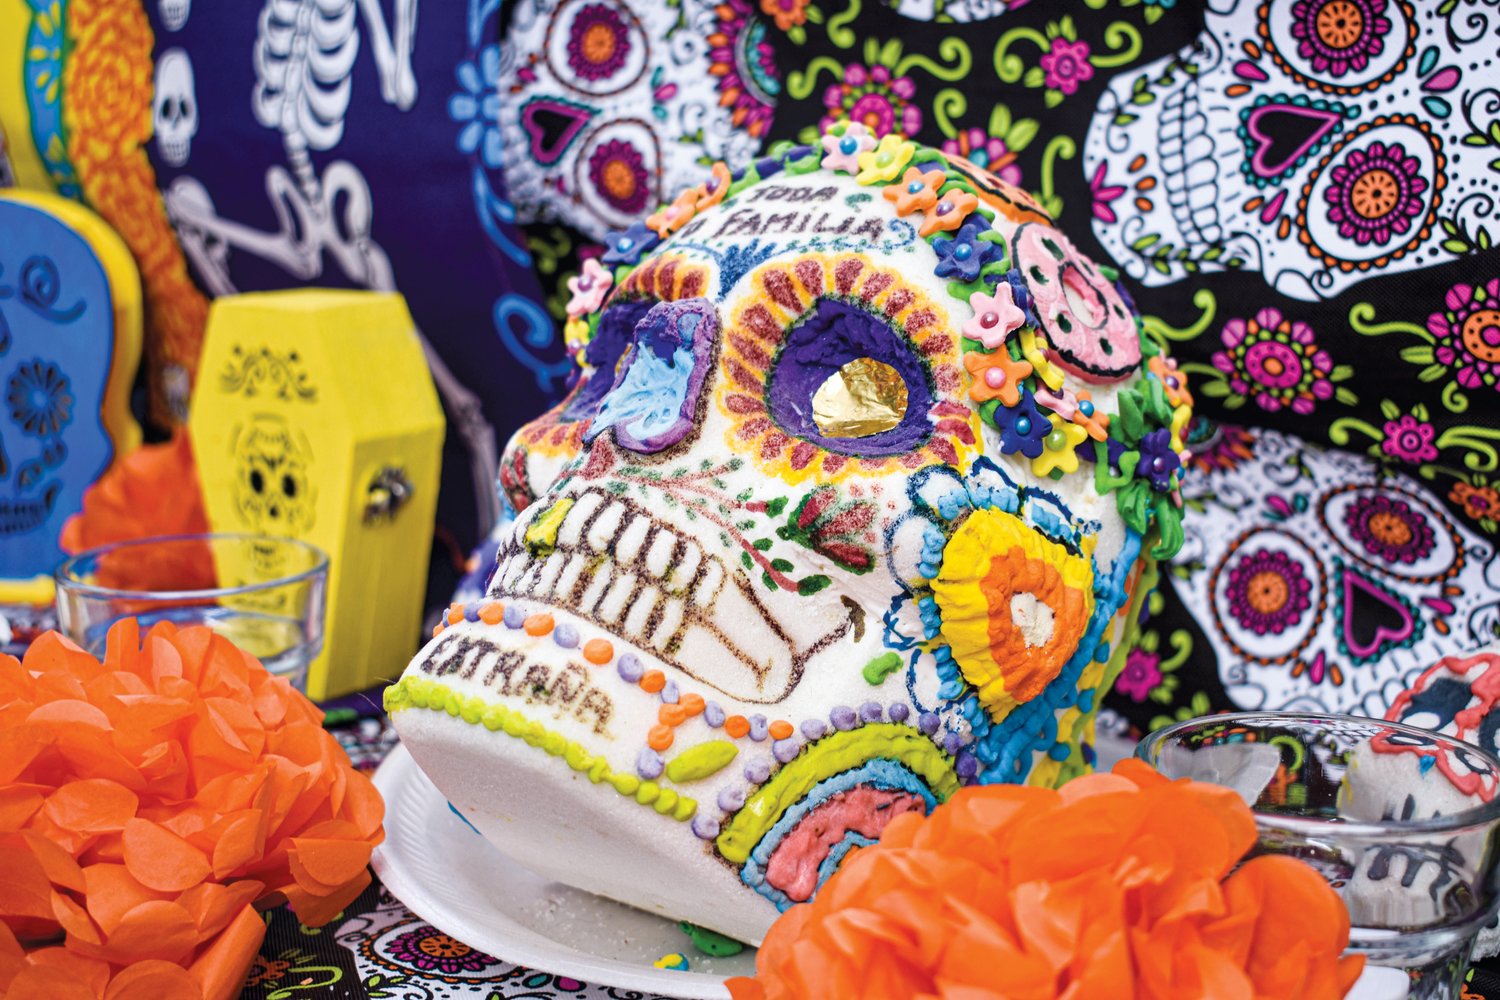 Maria Soto designed this sugar skull in honor of her brother, who passed away about three years ago, on her Day of the Dead altar inside CIS' Siler City office. Sugar skulls represent deceased loved ones.